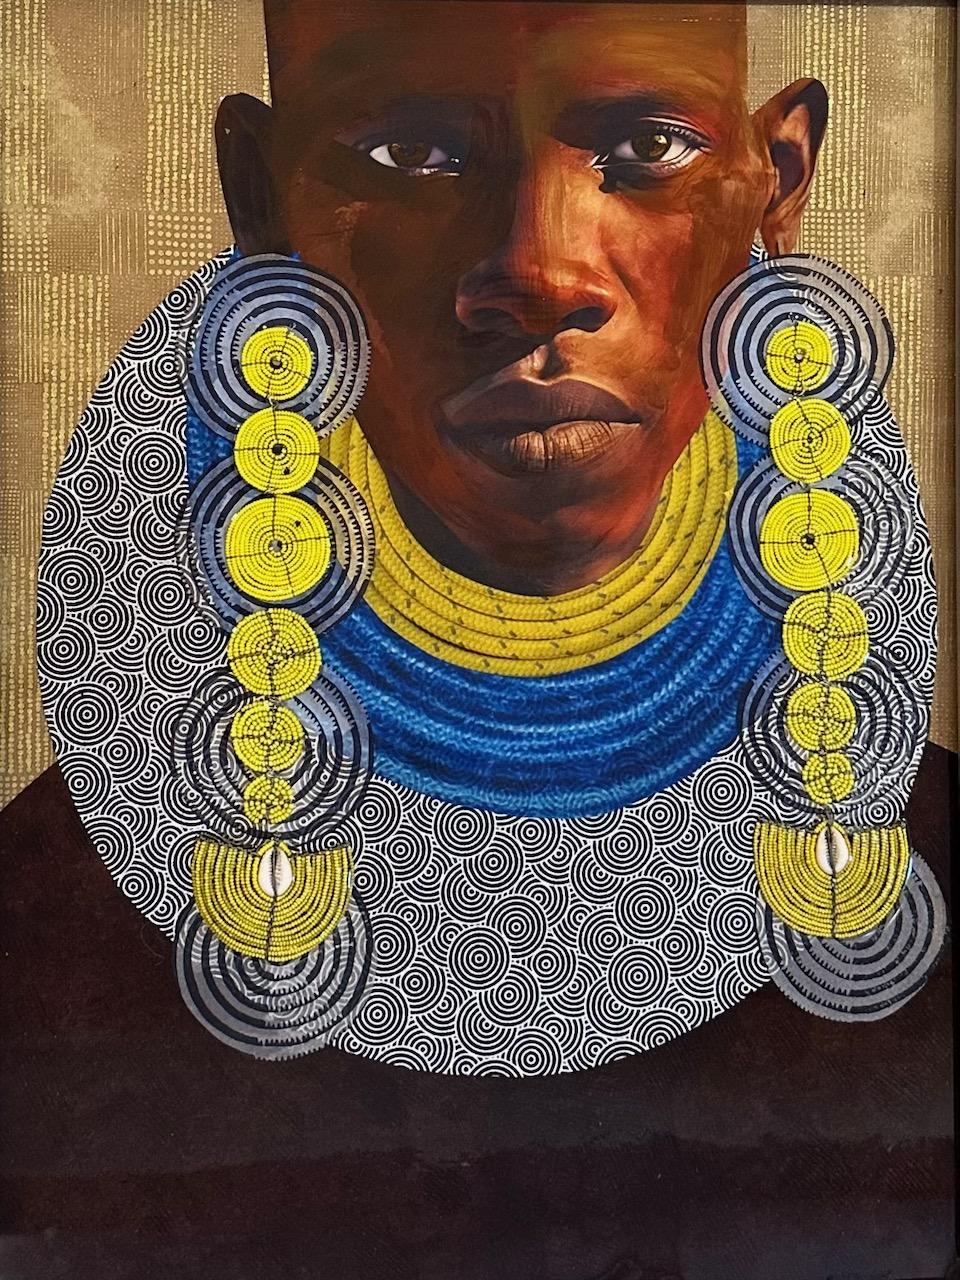 "Tribal Visions" African person wearing yellow earrings and rope necklaces - Mixed Media Art by Janice Frame